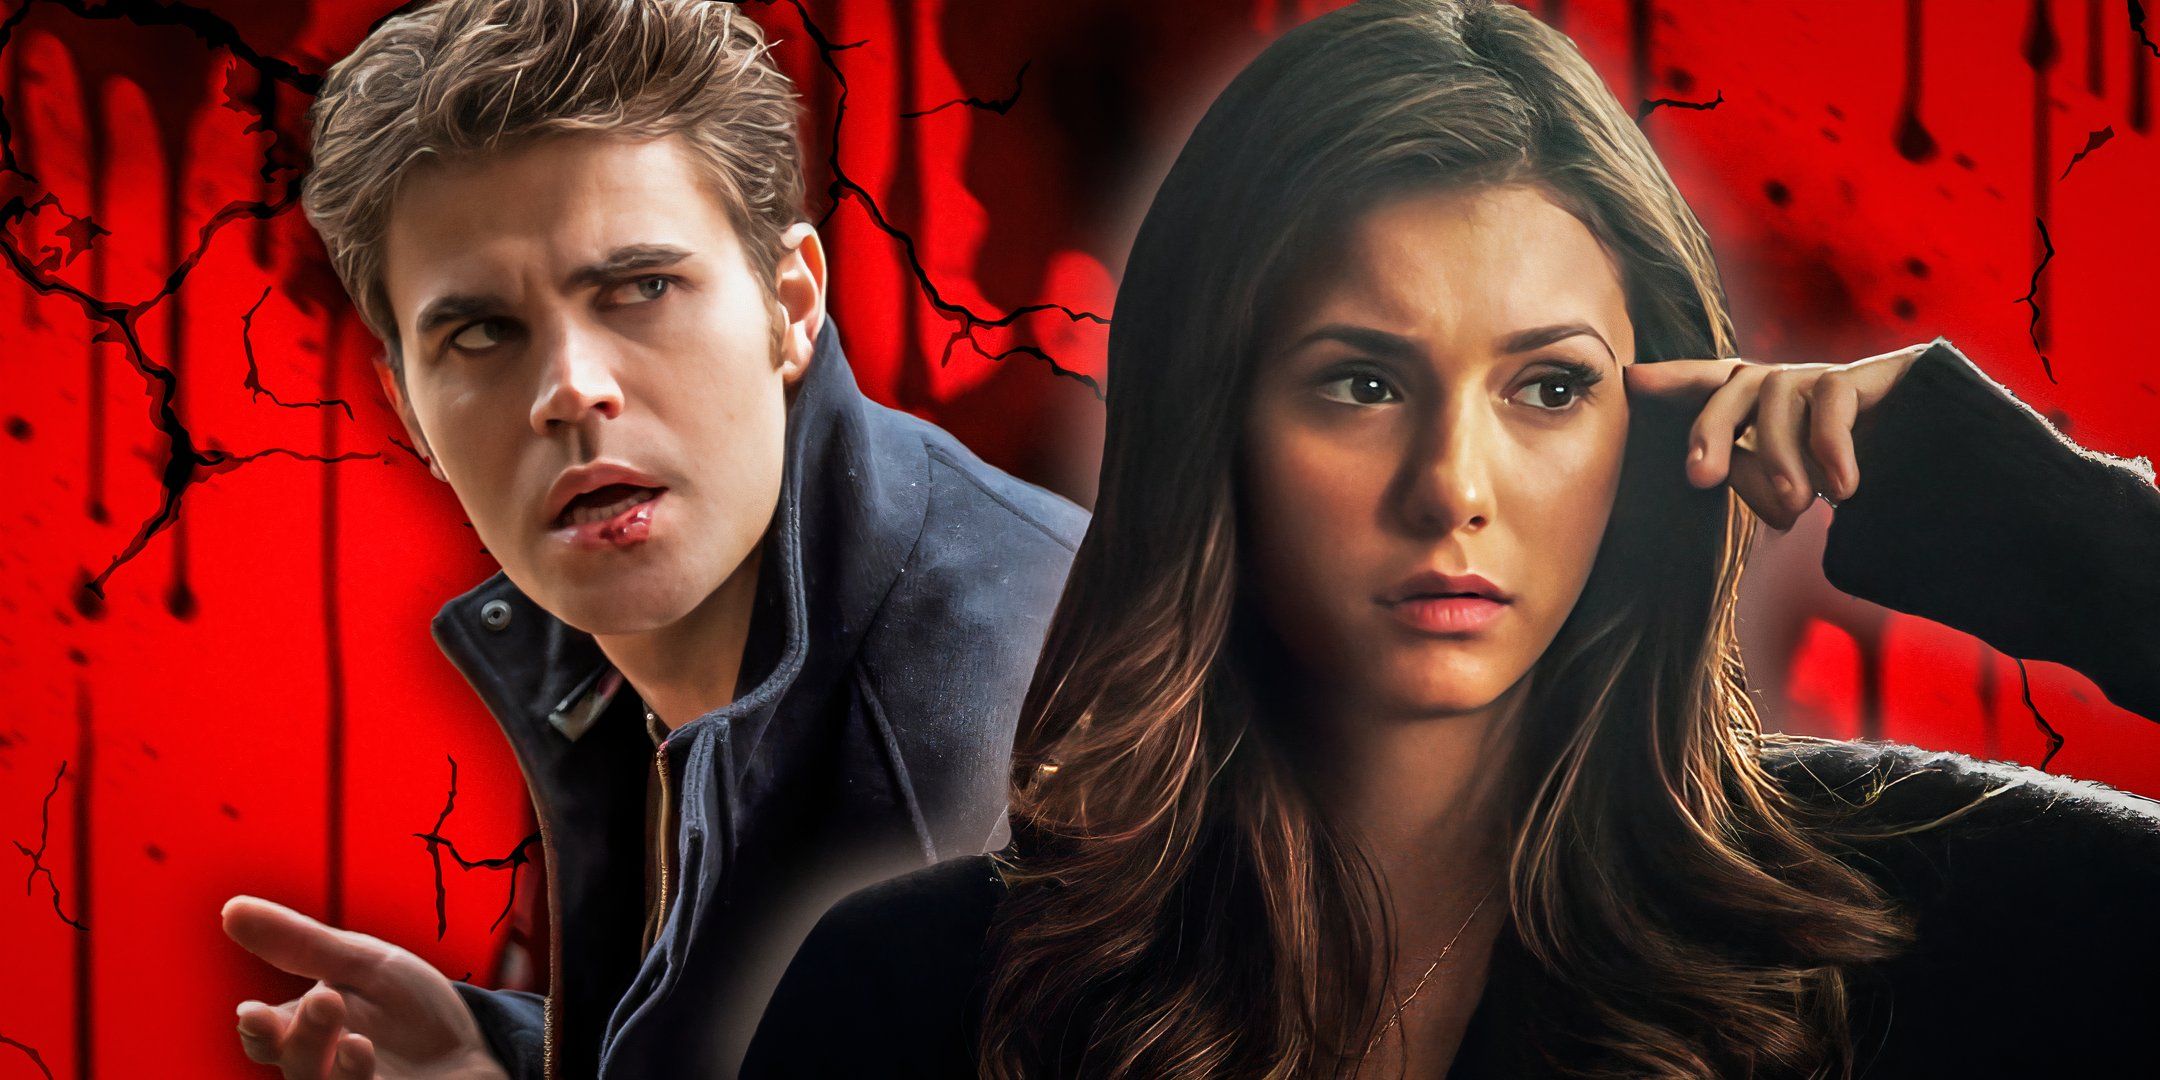 Stefan and Elena from The Vampire Diaries are in front of a red background.